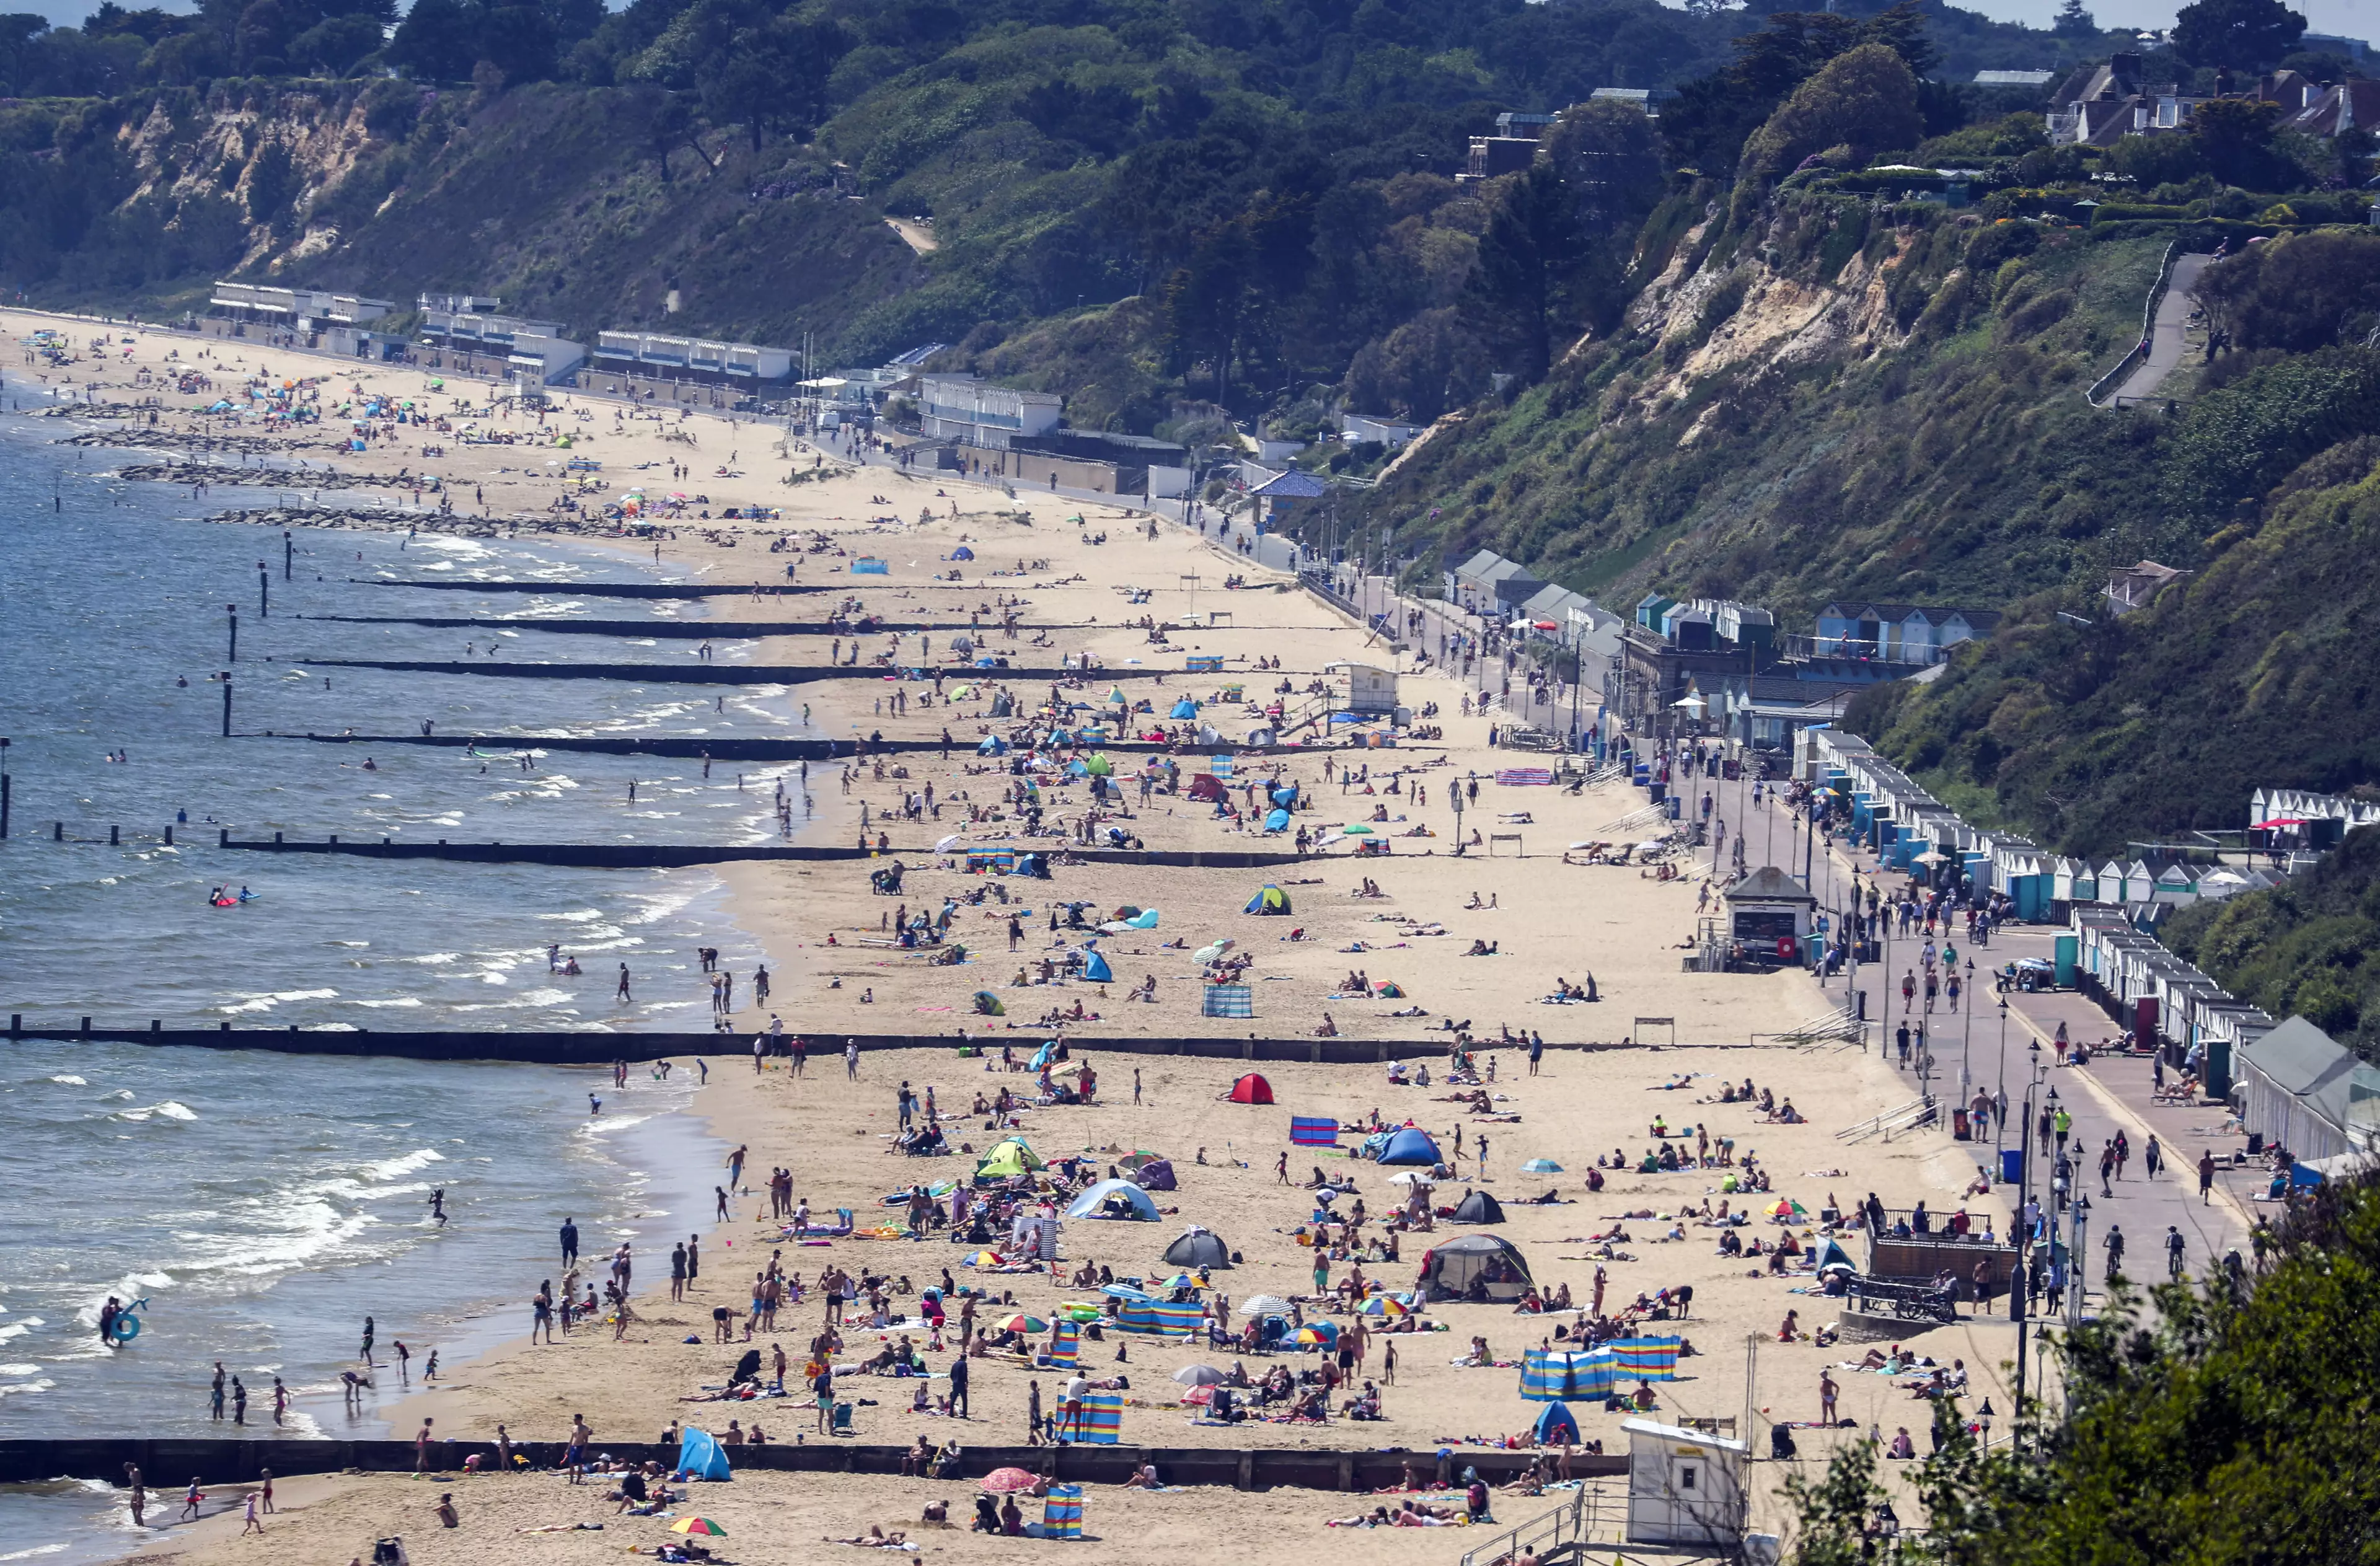 Bournemouth beach on Thursday after lockdown rules were eased.